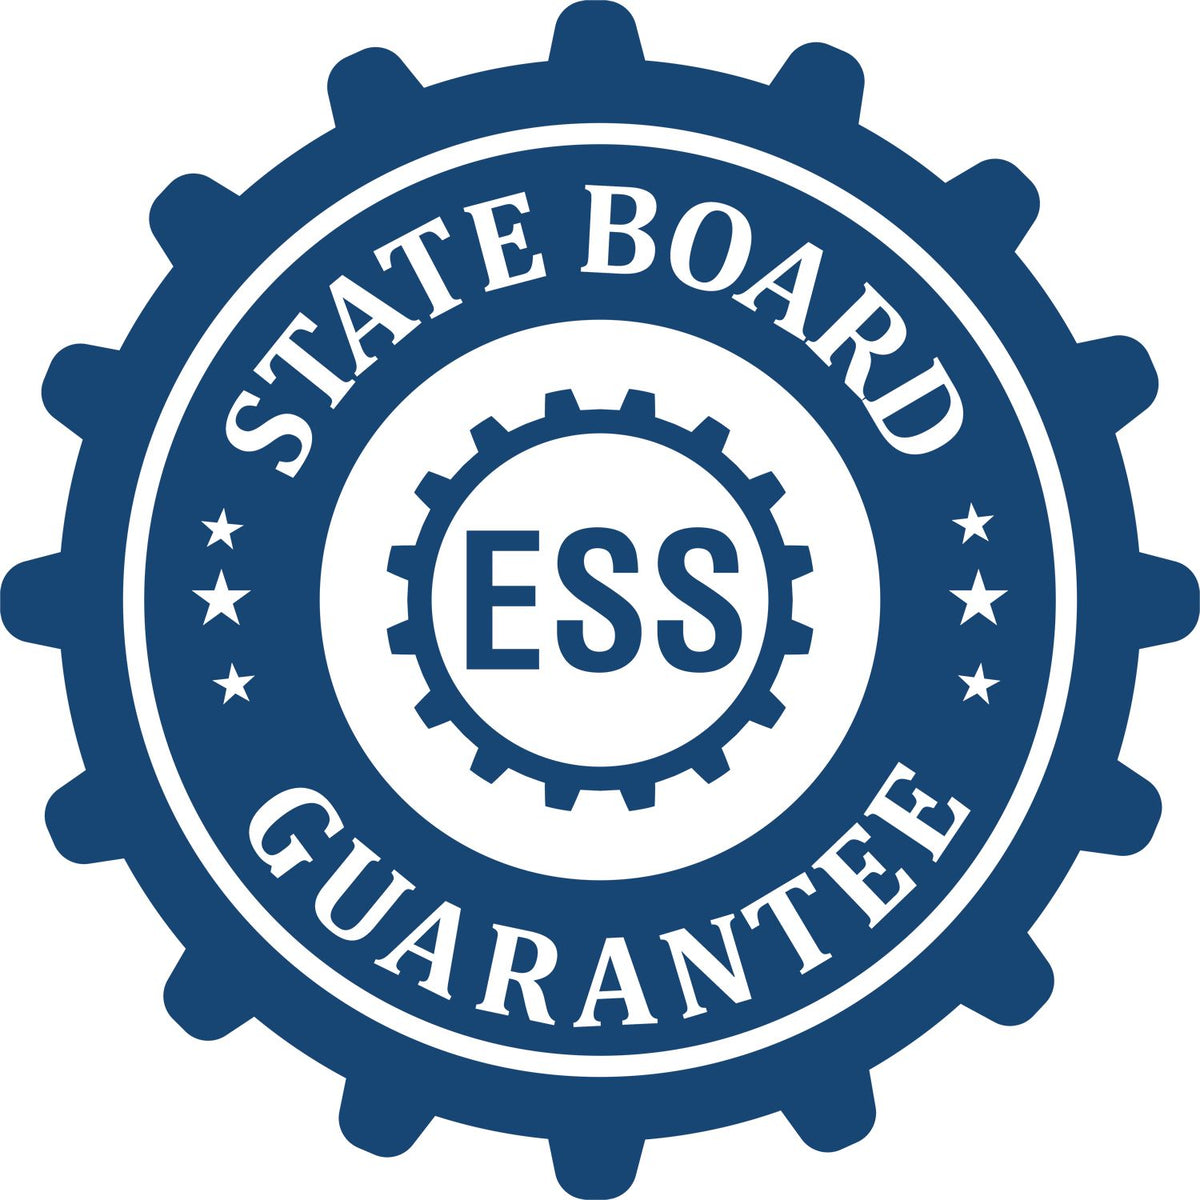 An emblem in a gear shape illustrating a state board guarantee for the New Mexico Landscape Architectural Seal Stamp product.